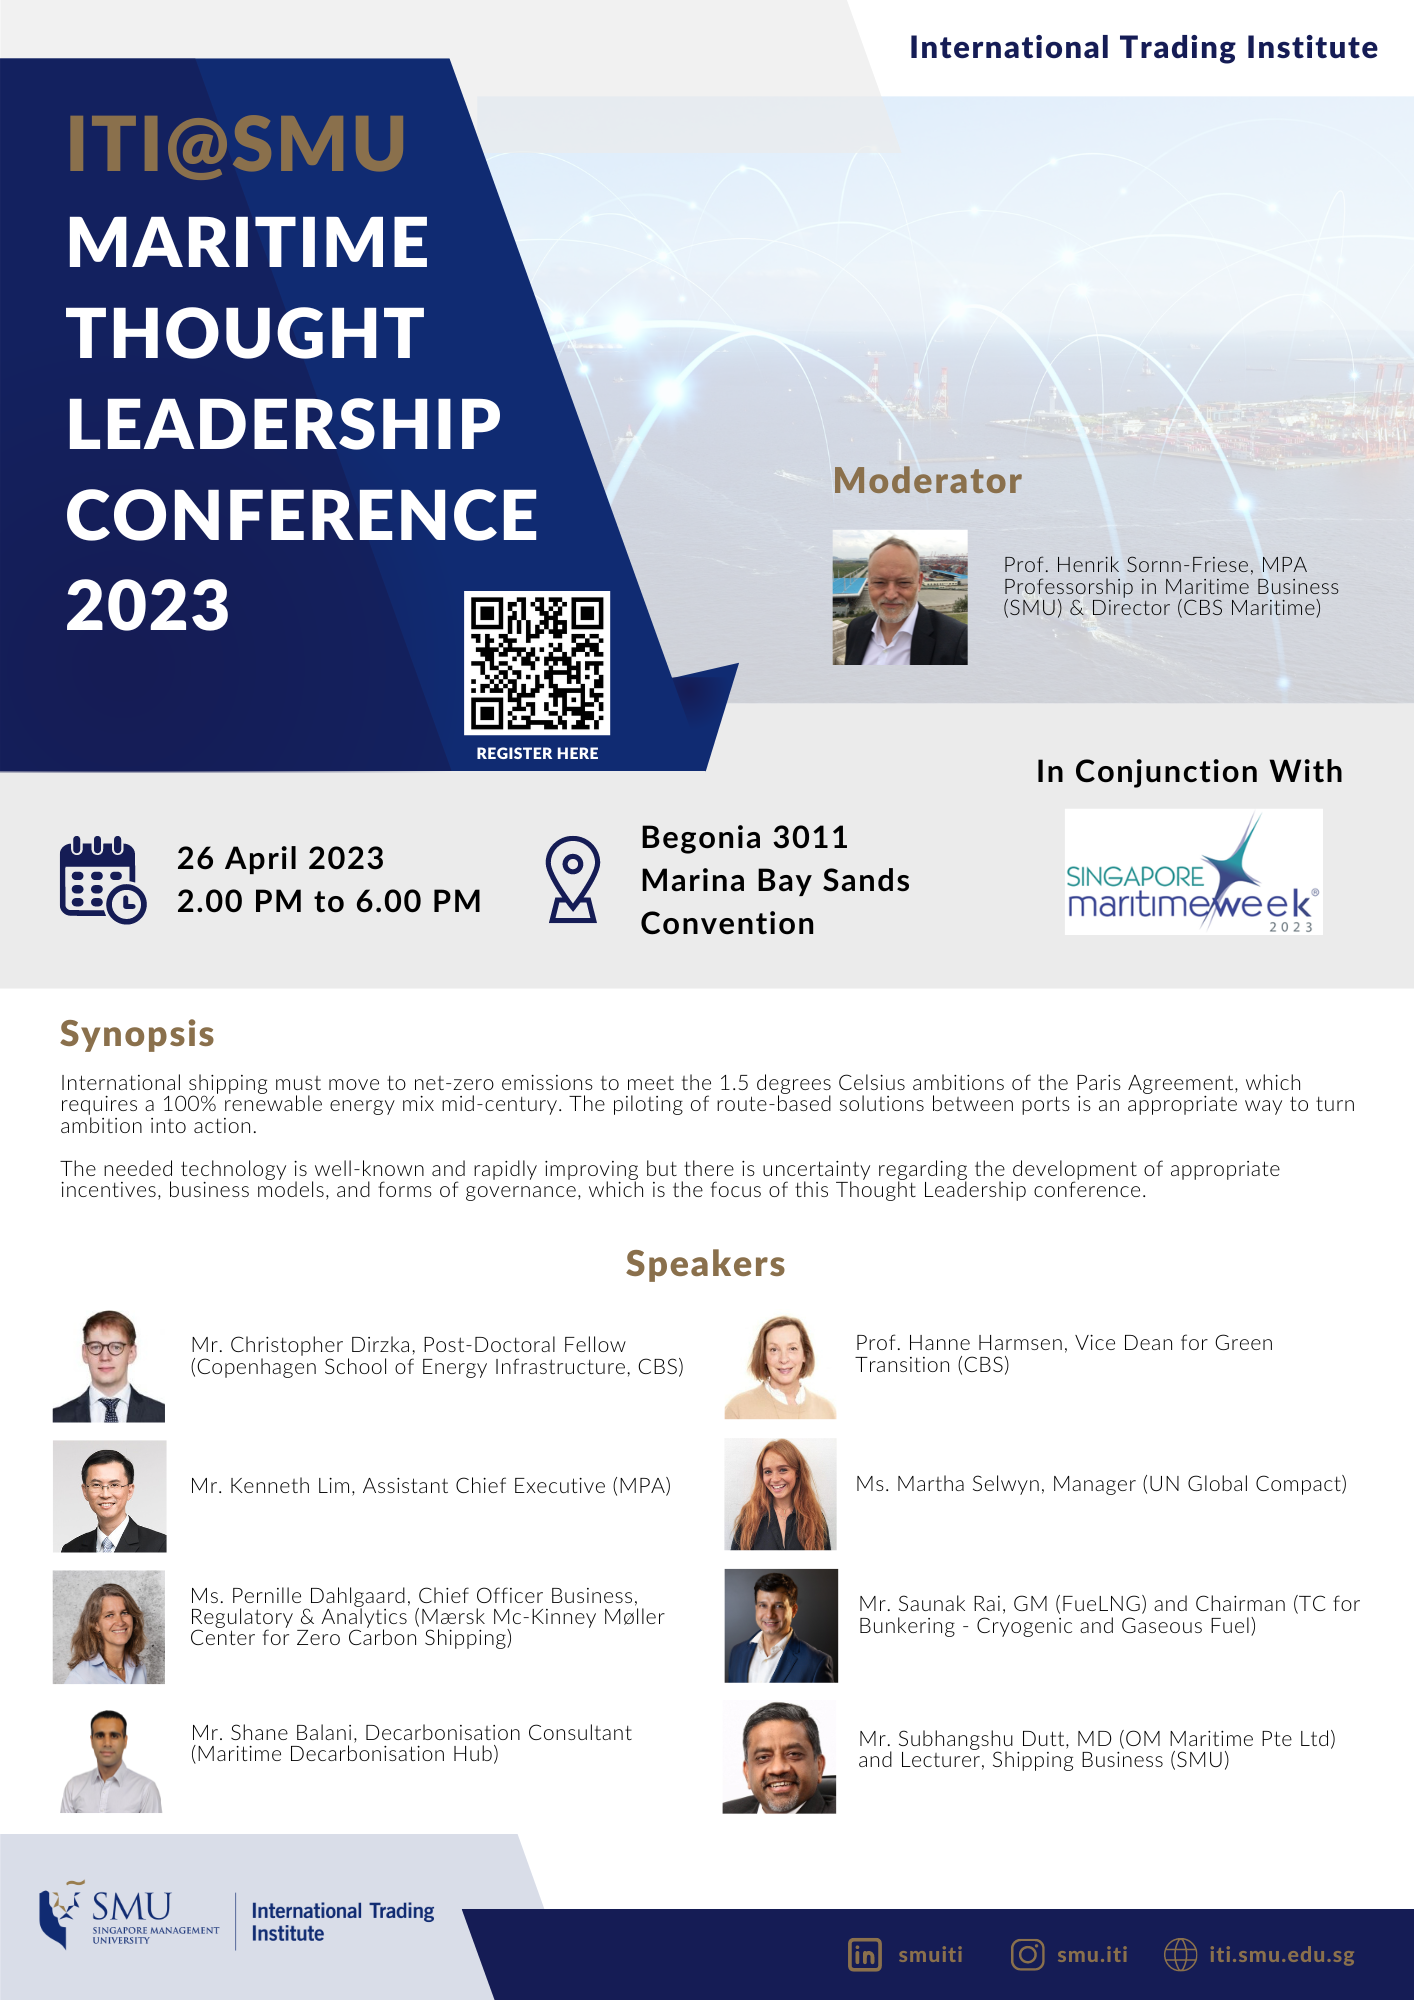 Leadership Conference International Trading Institute